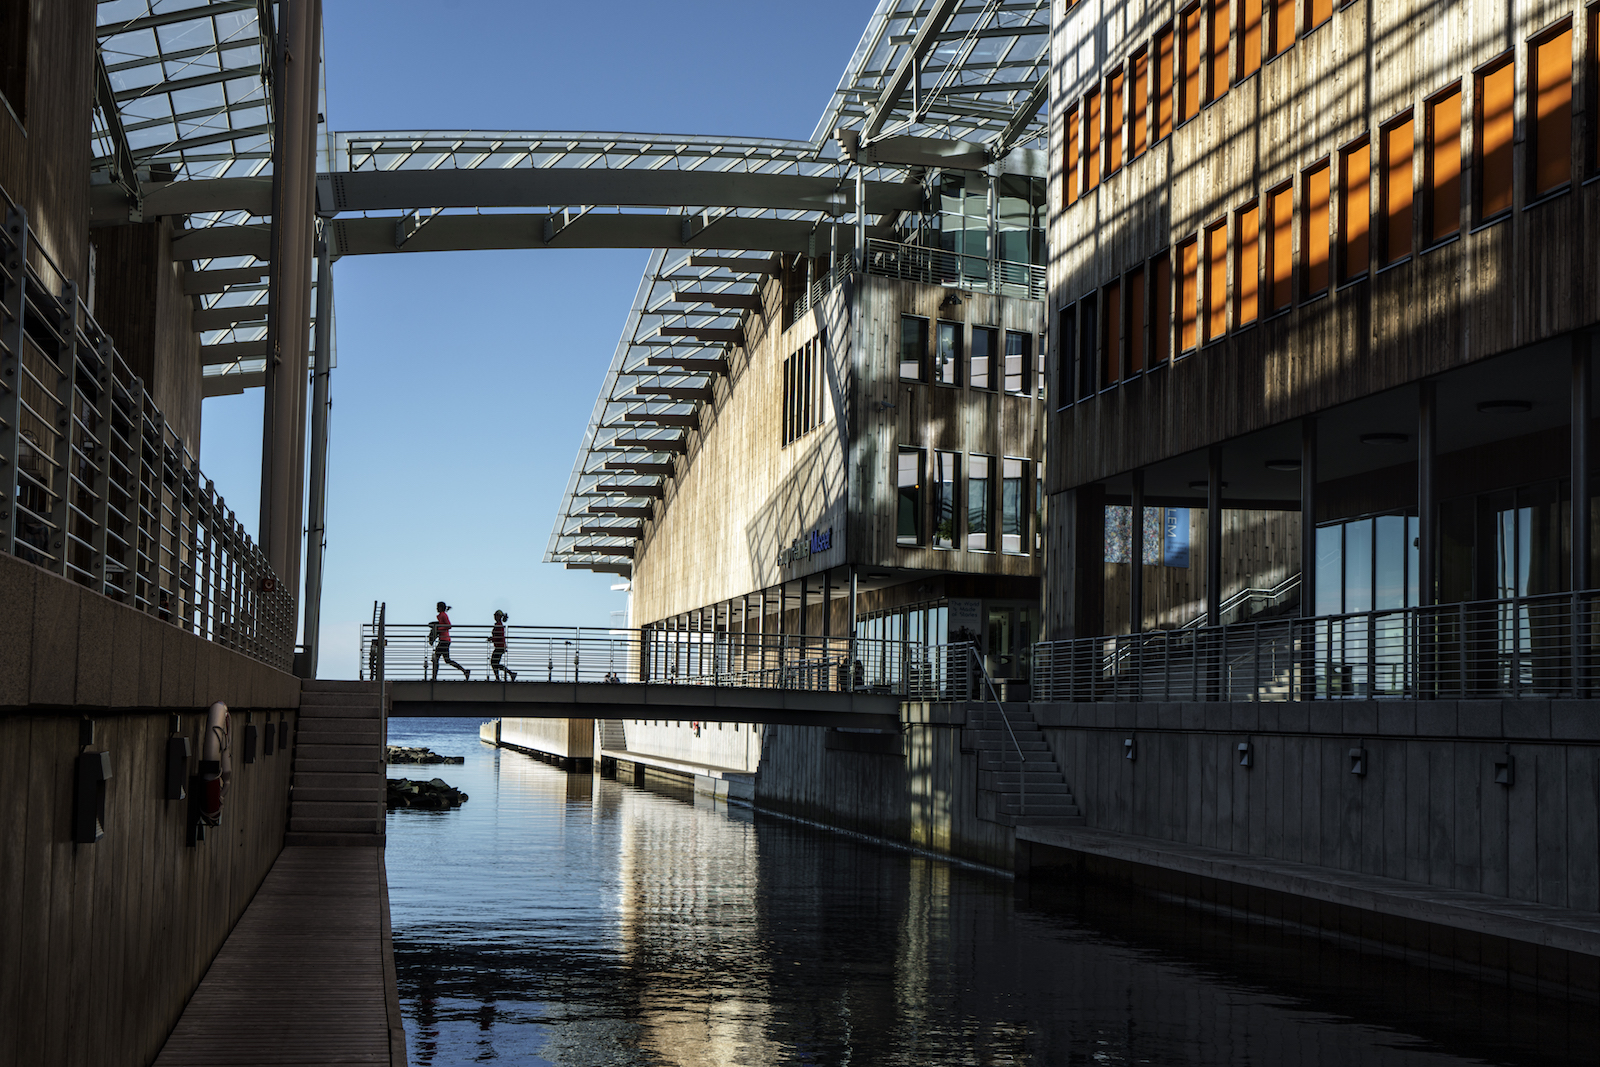 NORWAY. 2016. Oslo. The Astrup Fearnley museum, designed by Renzo Piano, in the Tjuvholmen neighborhood.